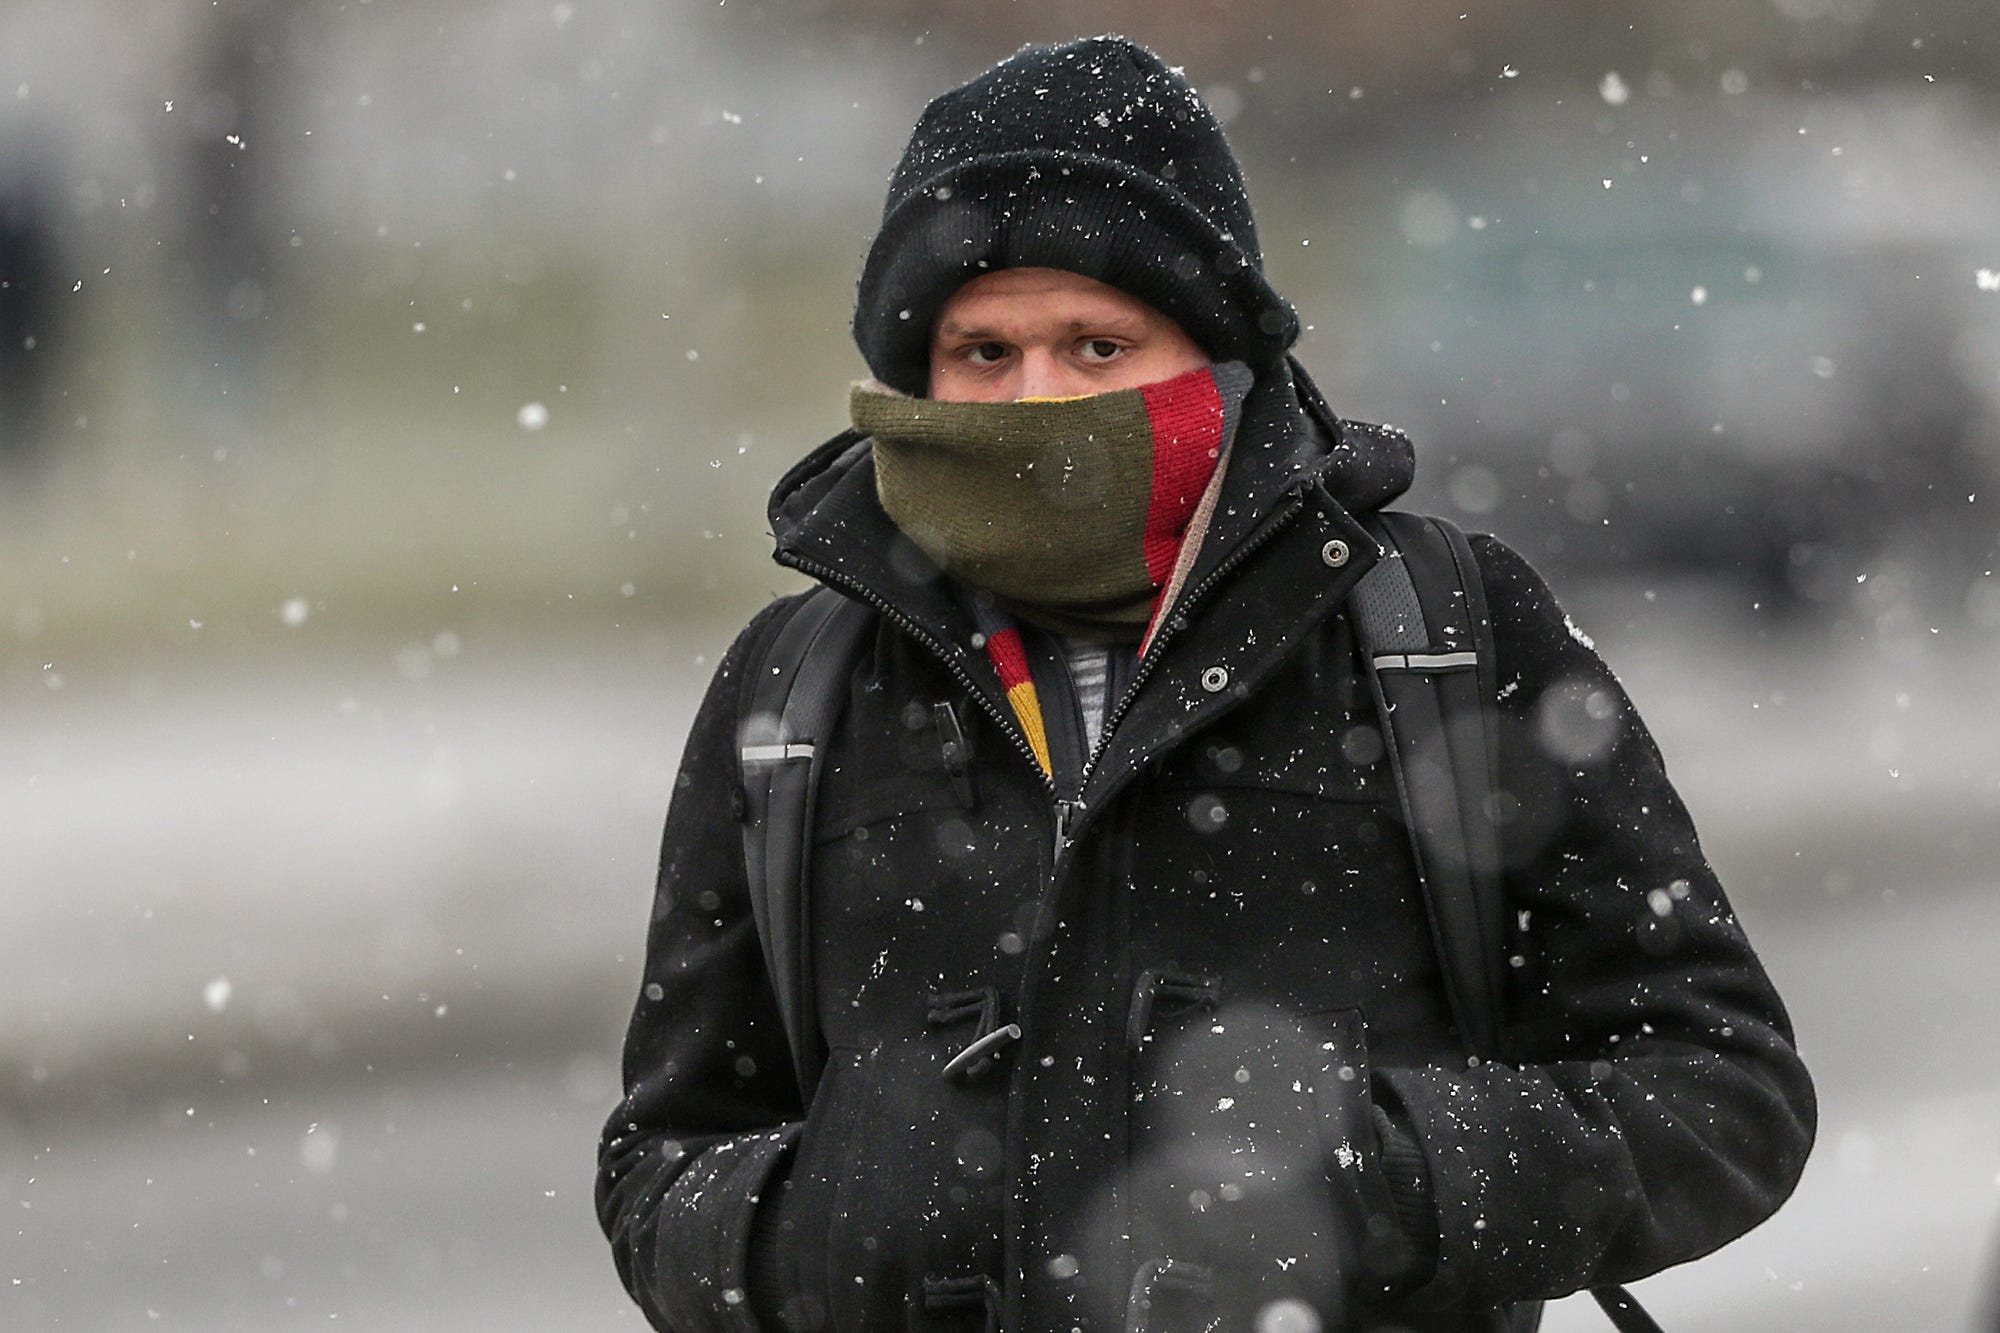 Eyes on the road: Snow and rain likely today